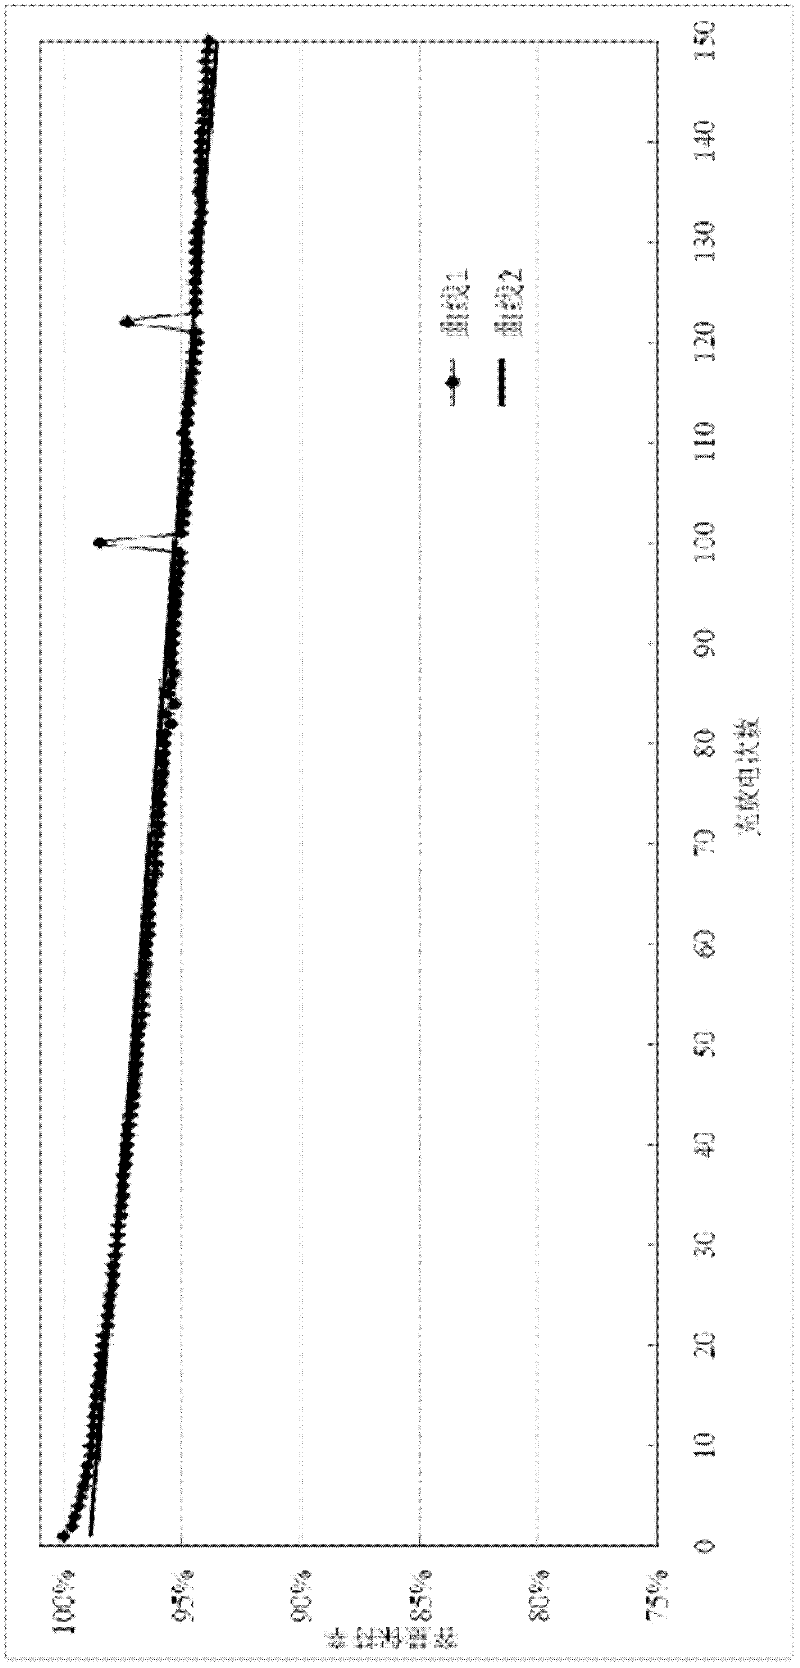 Prediction method for battery life and apparatus for detecting battery life